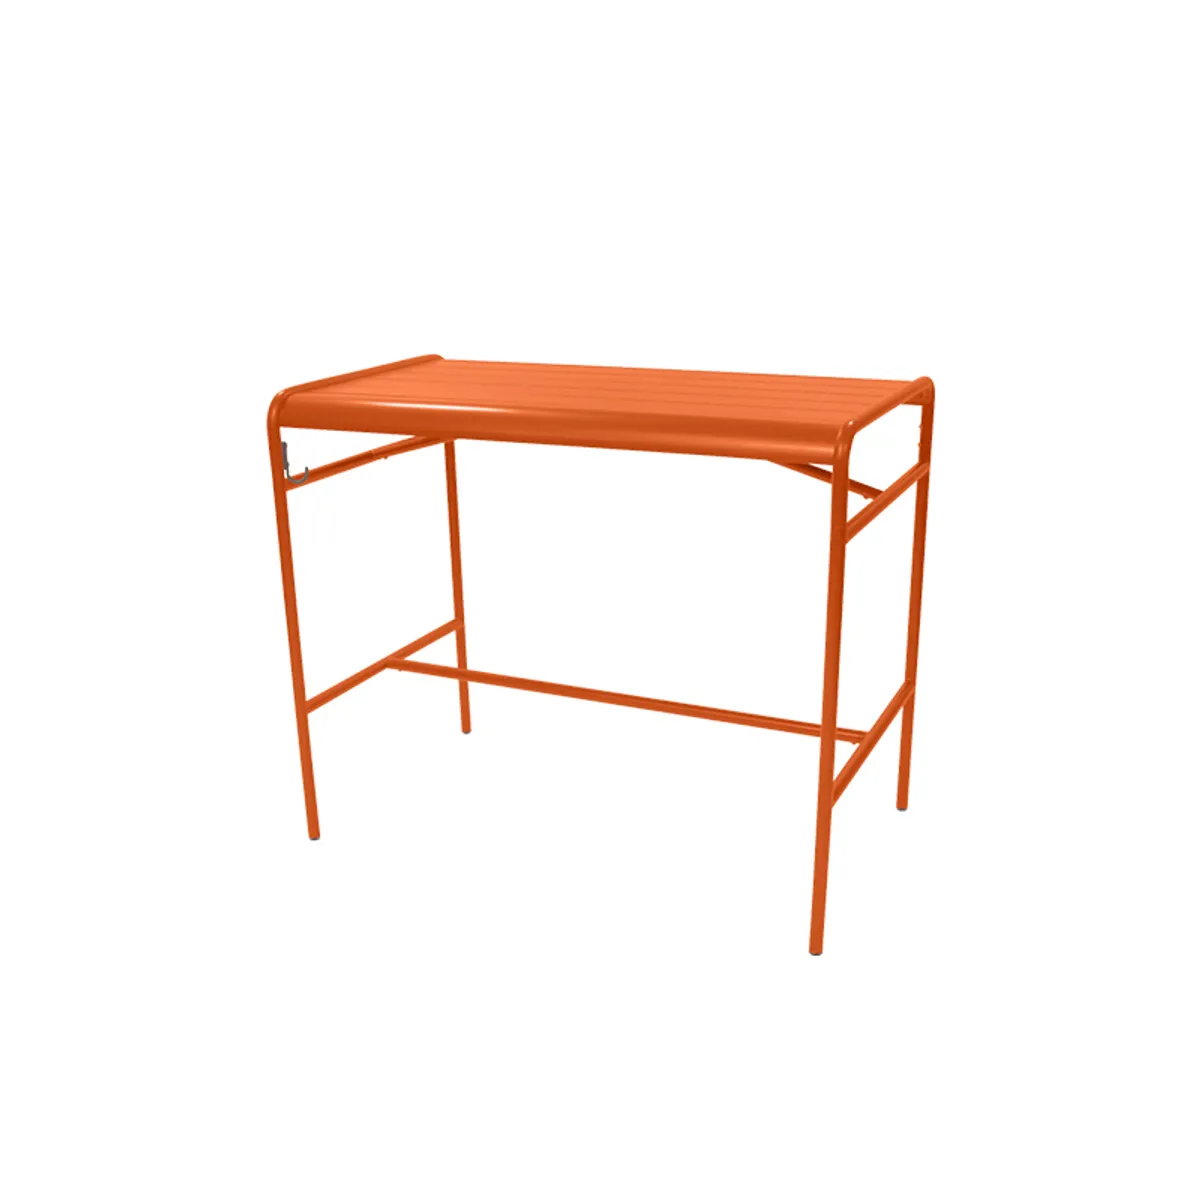 Luxembourg High Table Outdoor Furniture For Cafes And Bars Orange